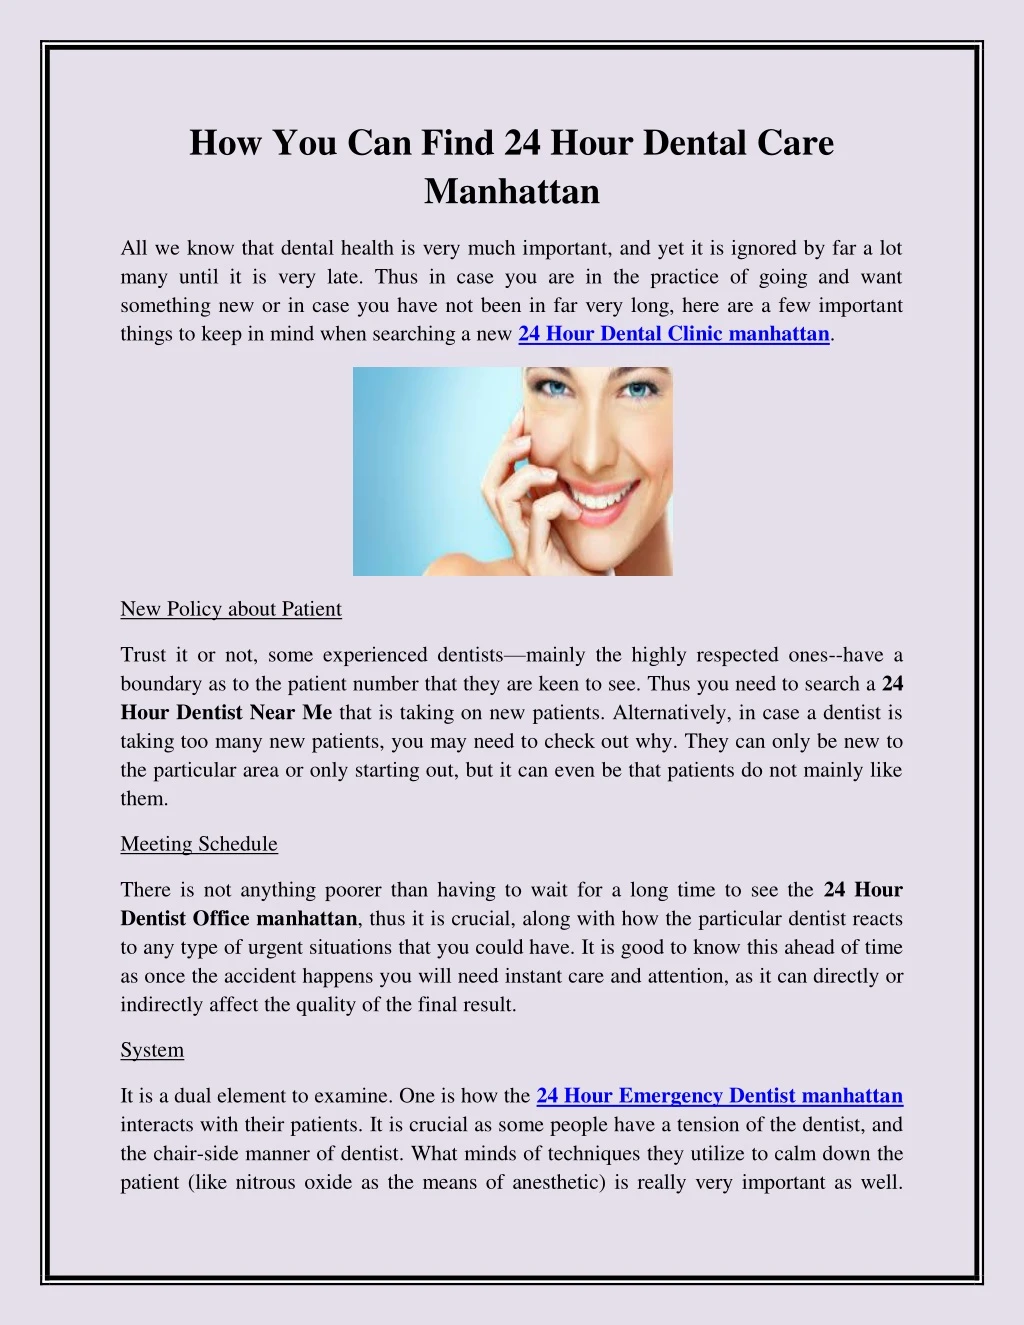 how you can find 24 hour dental care manhattan